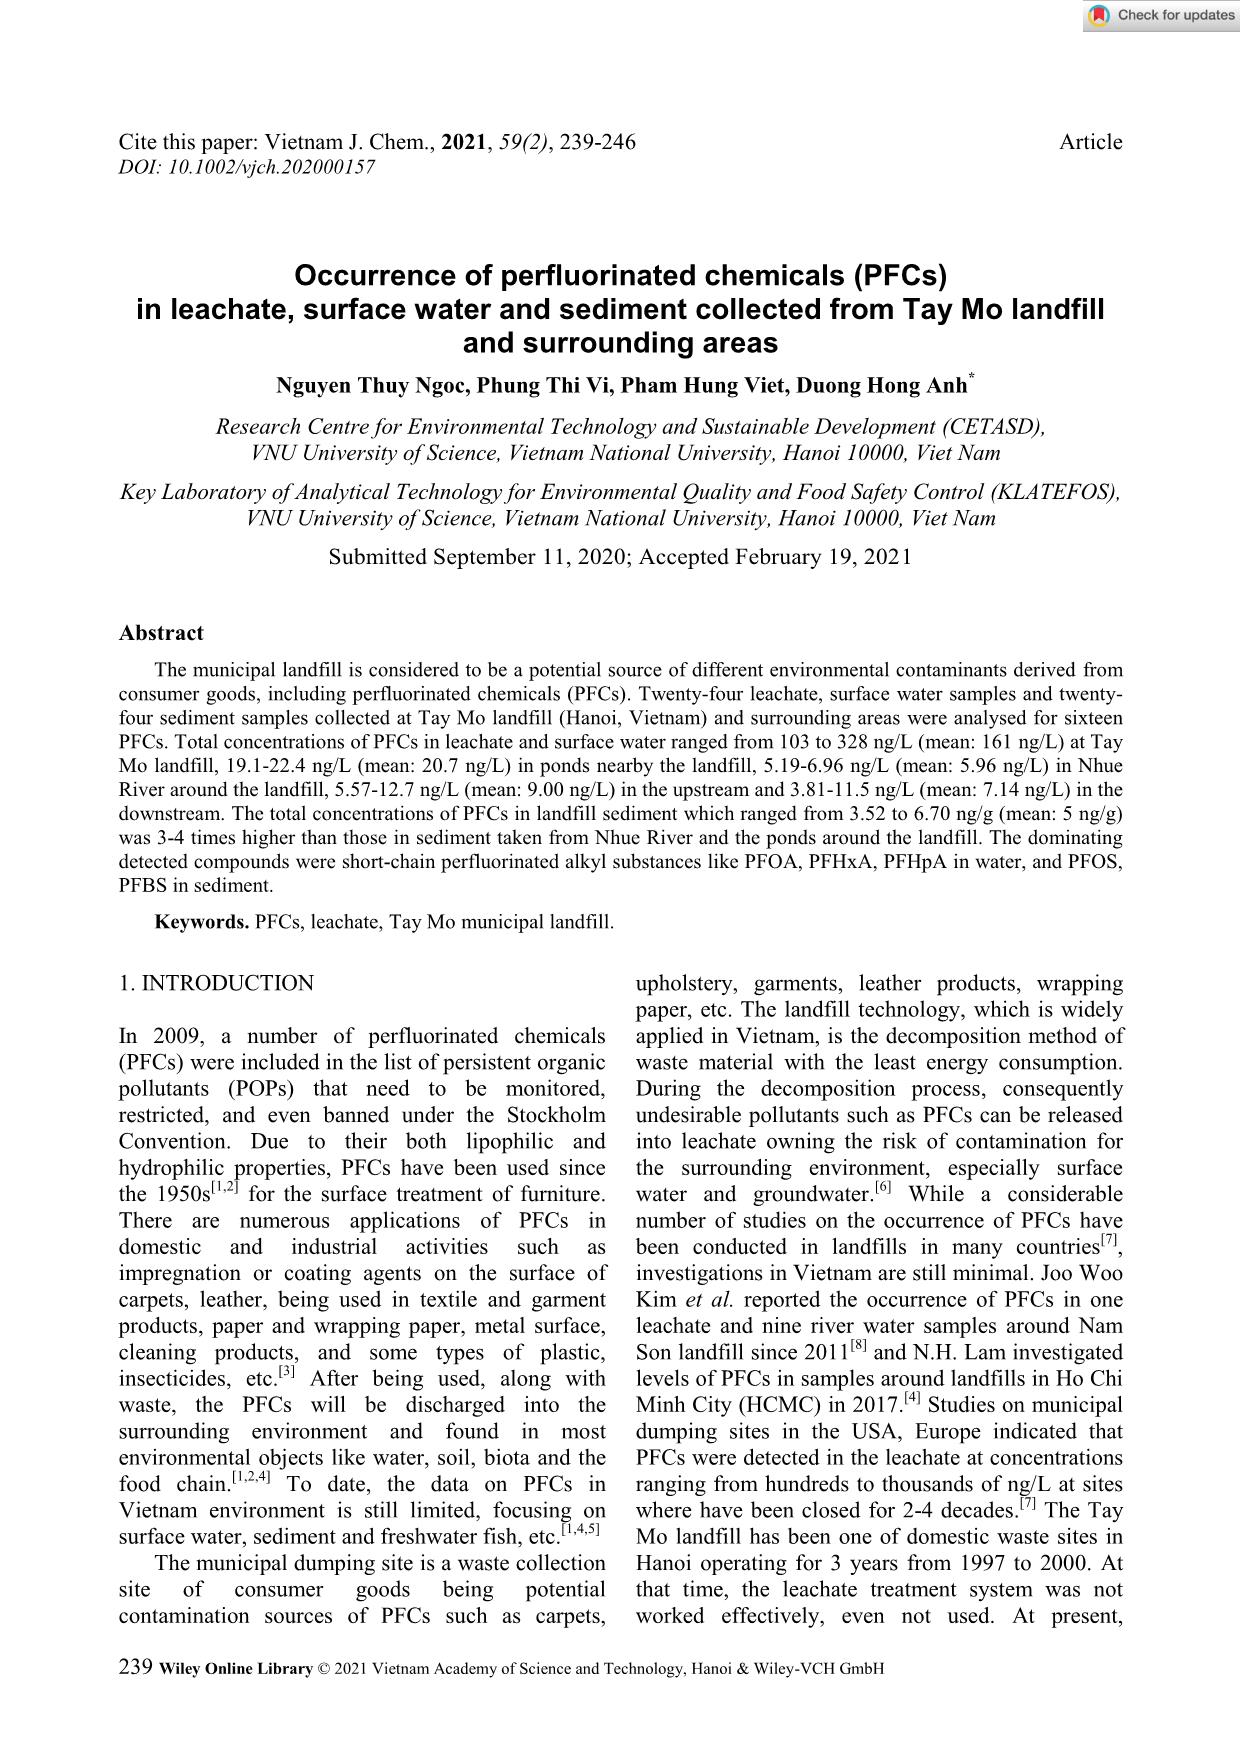 Occurrence of perfluorinated chemicals (PFCs) in leachate, surface water and sediment collected from Tay Mo landfill and surrounding areas trang 1